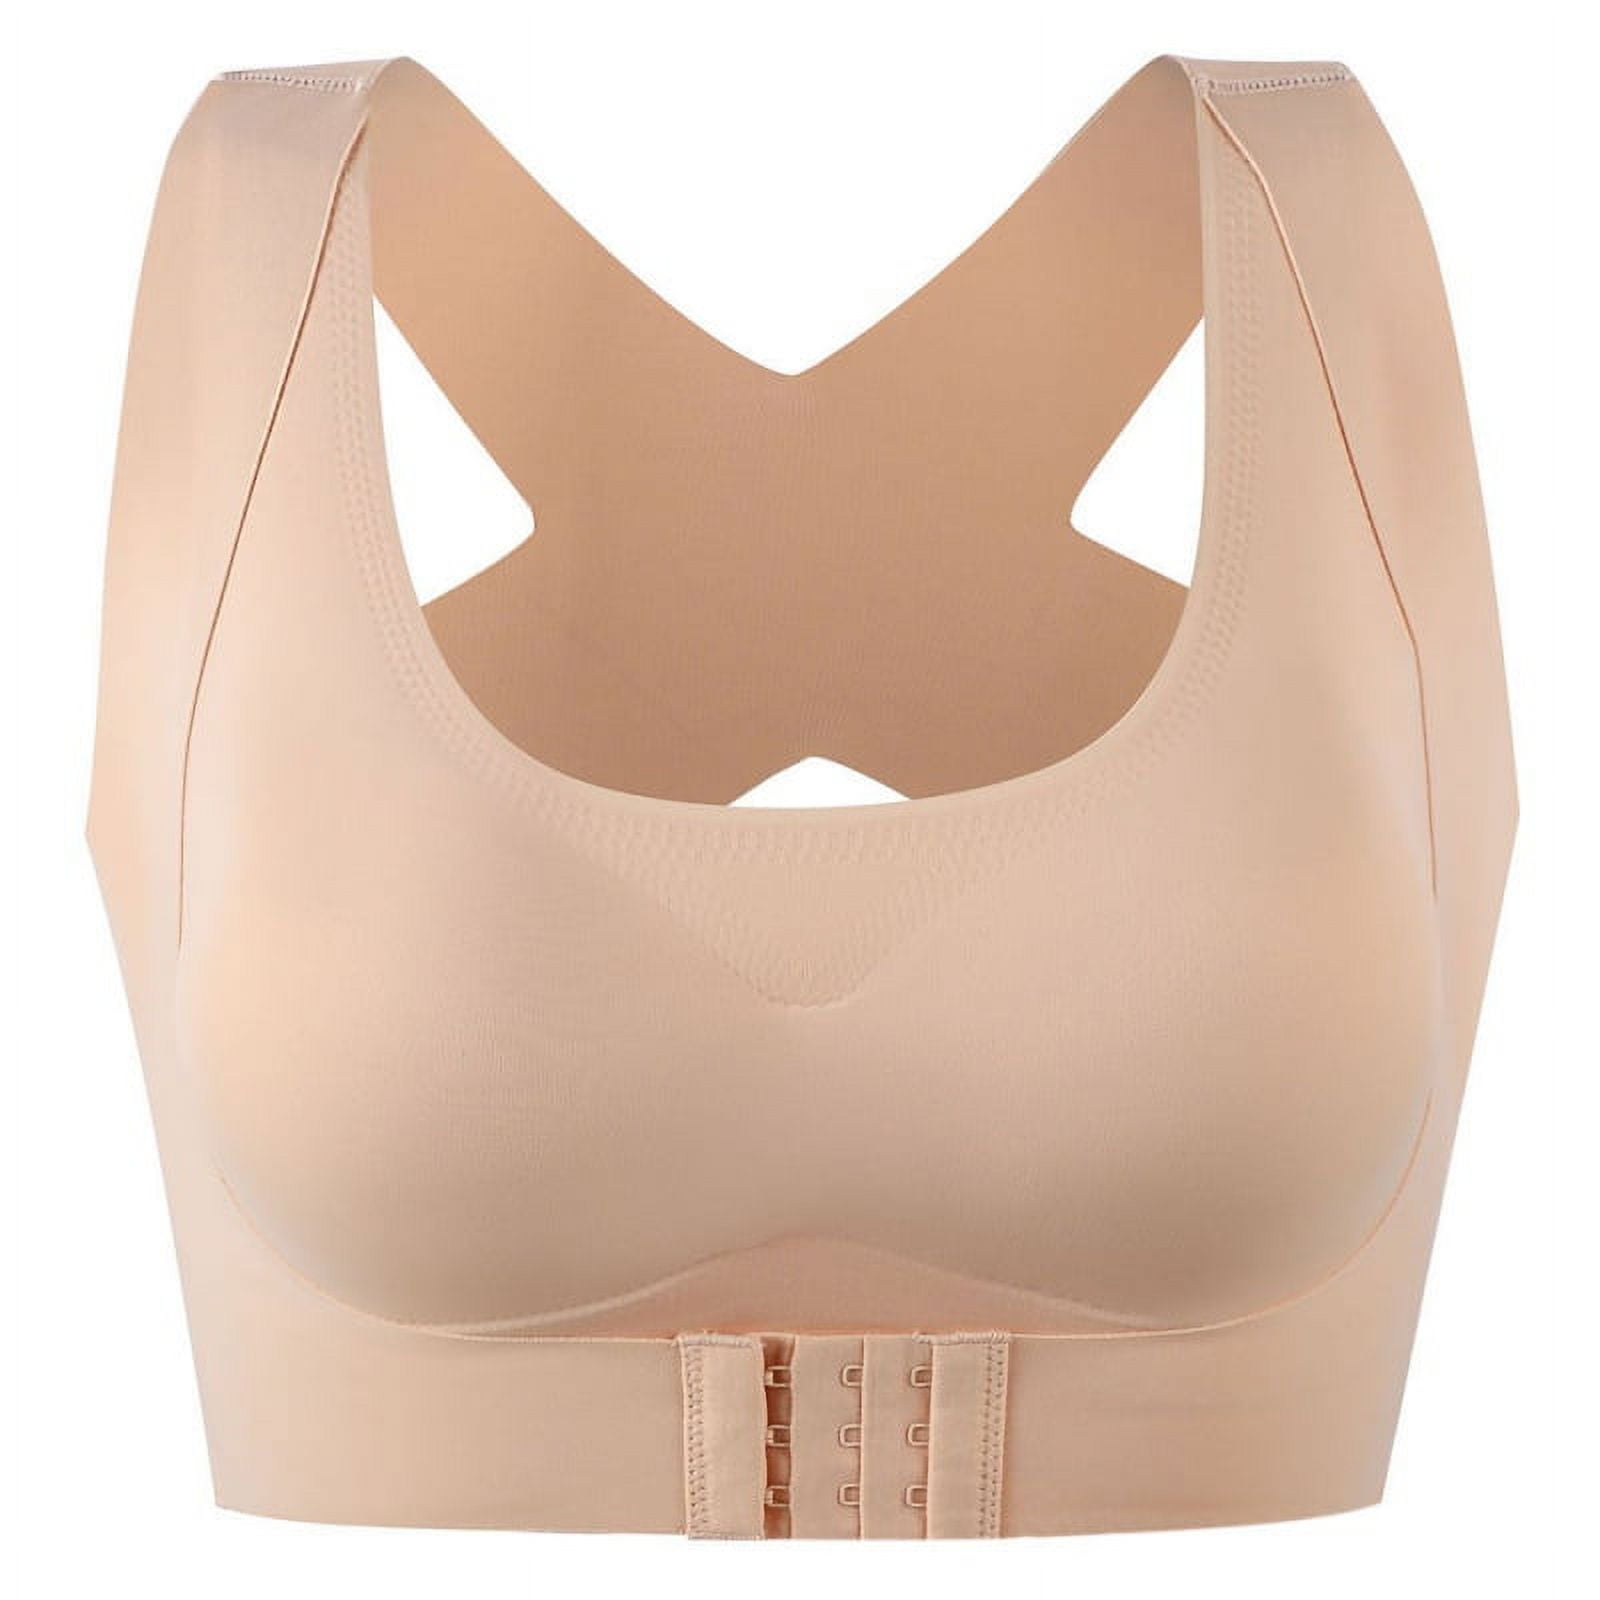 Post Surgical Bra Front Closure